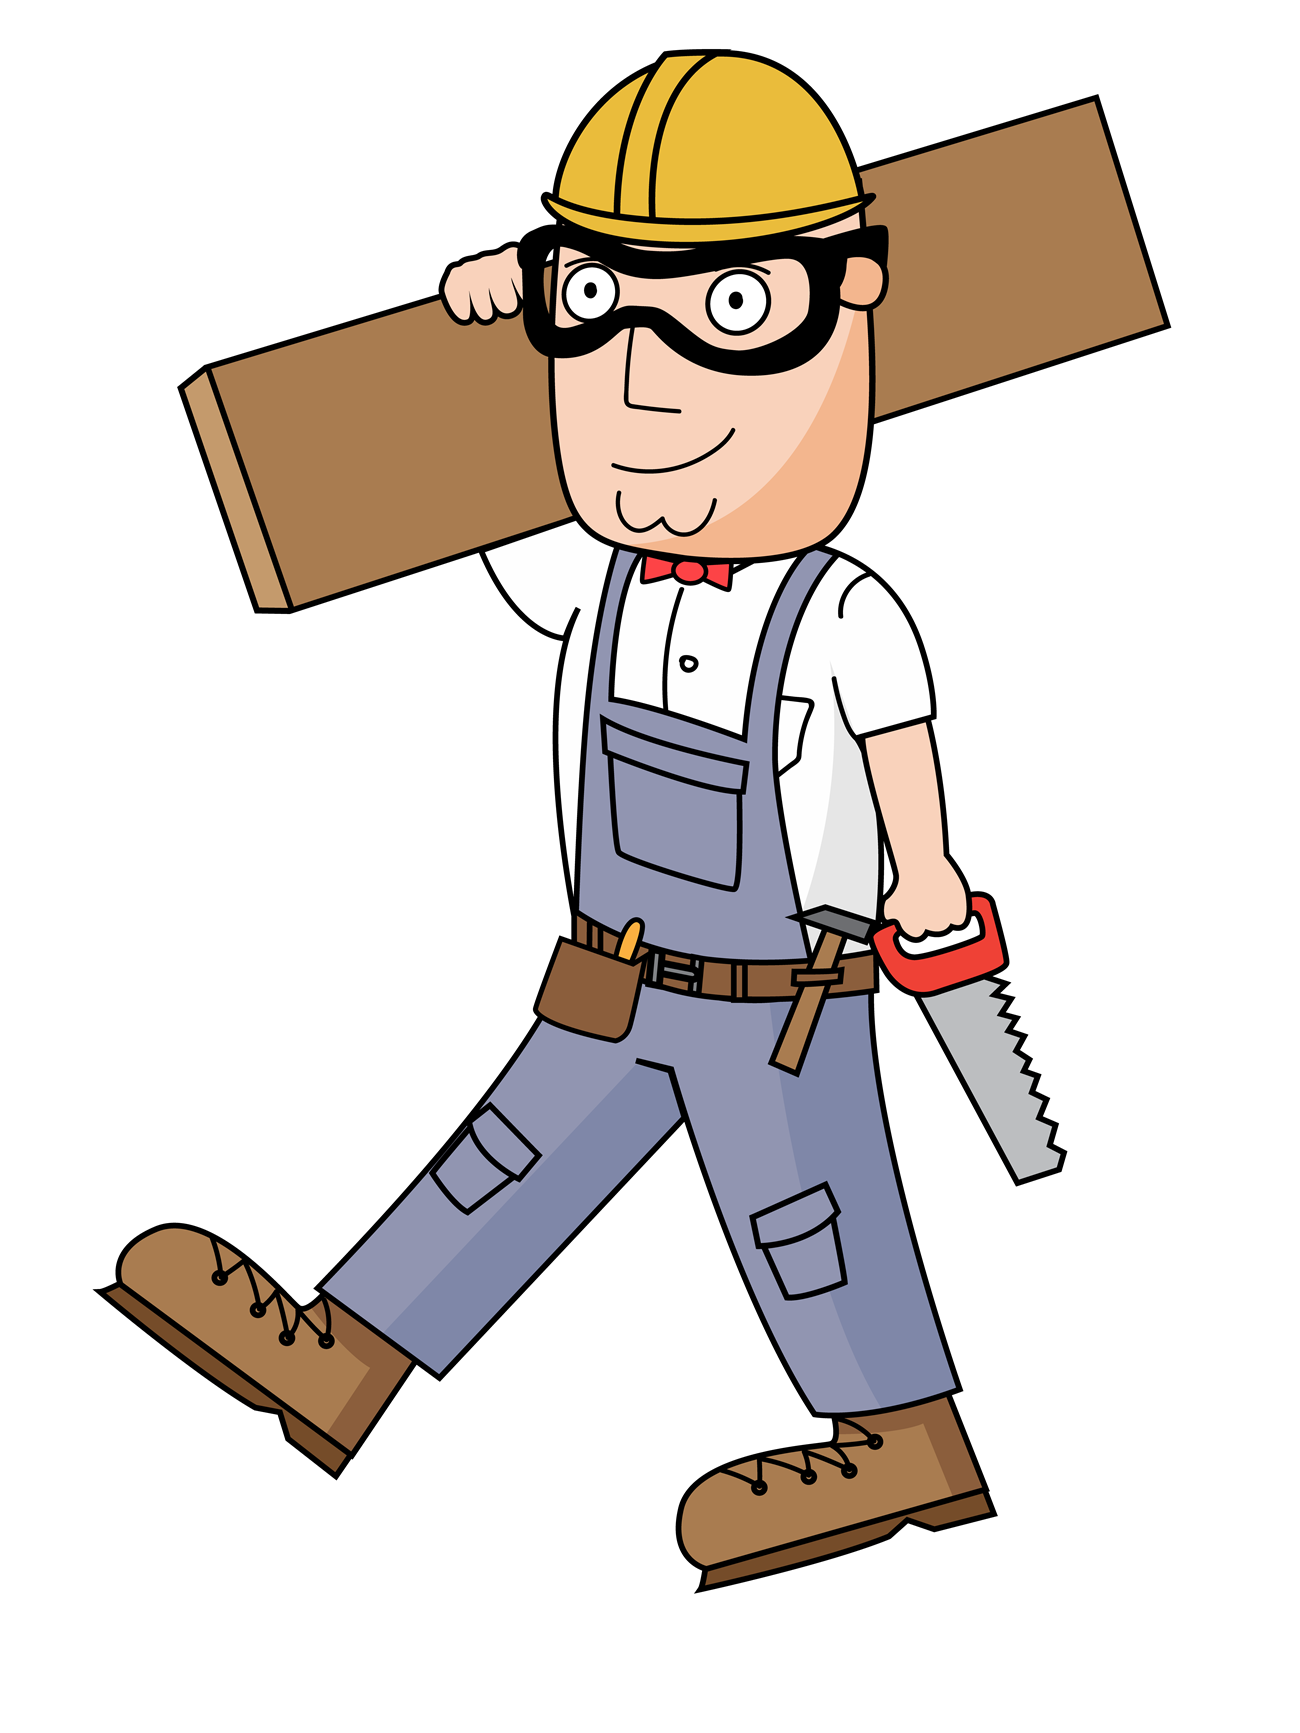 billy dressed up as a carpenter